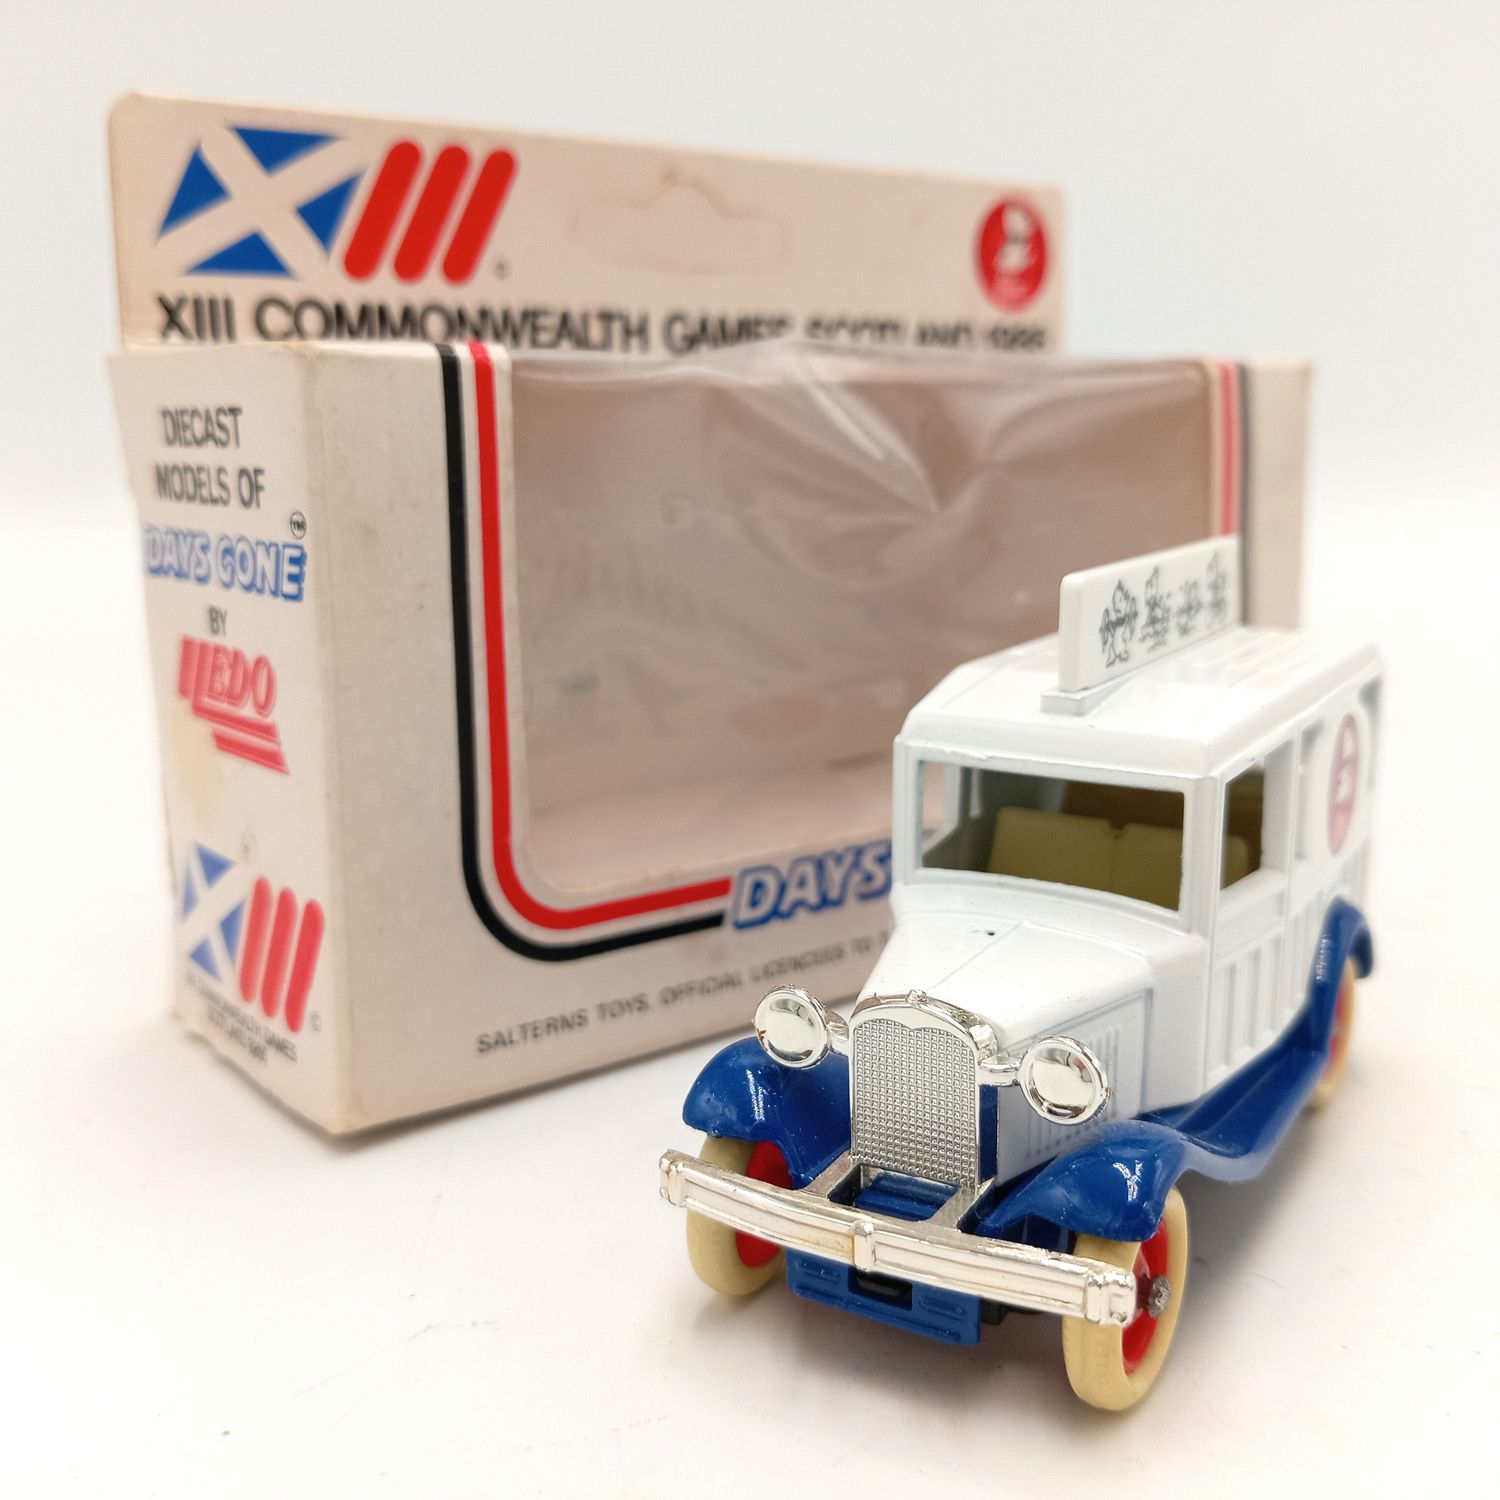 Lledo Ford model A advertisement car for &quot; XIII Commonwealth Games Scotland 1986 - in box